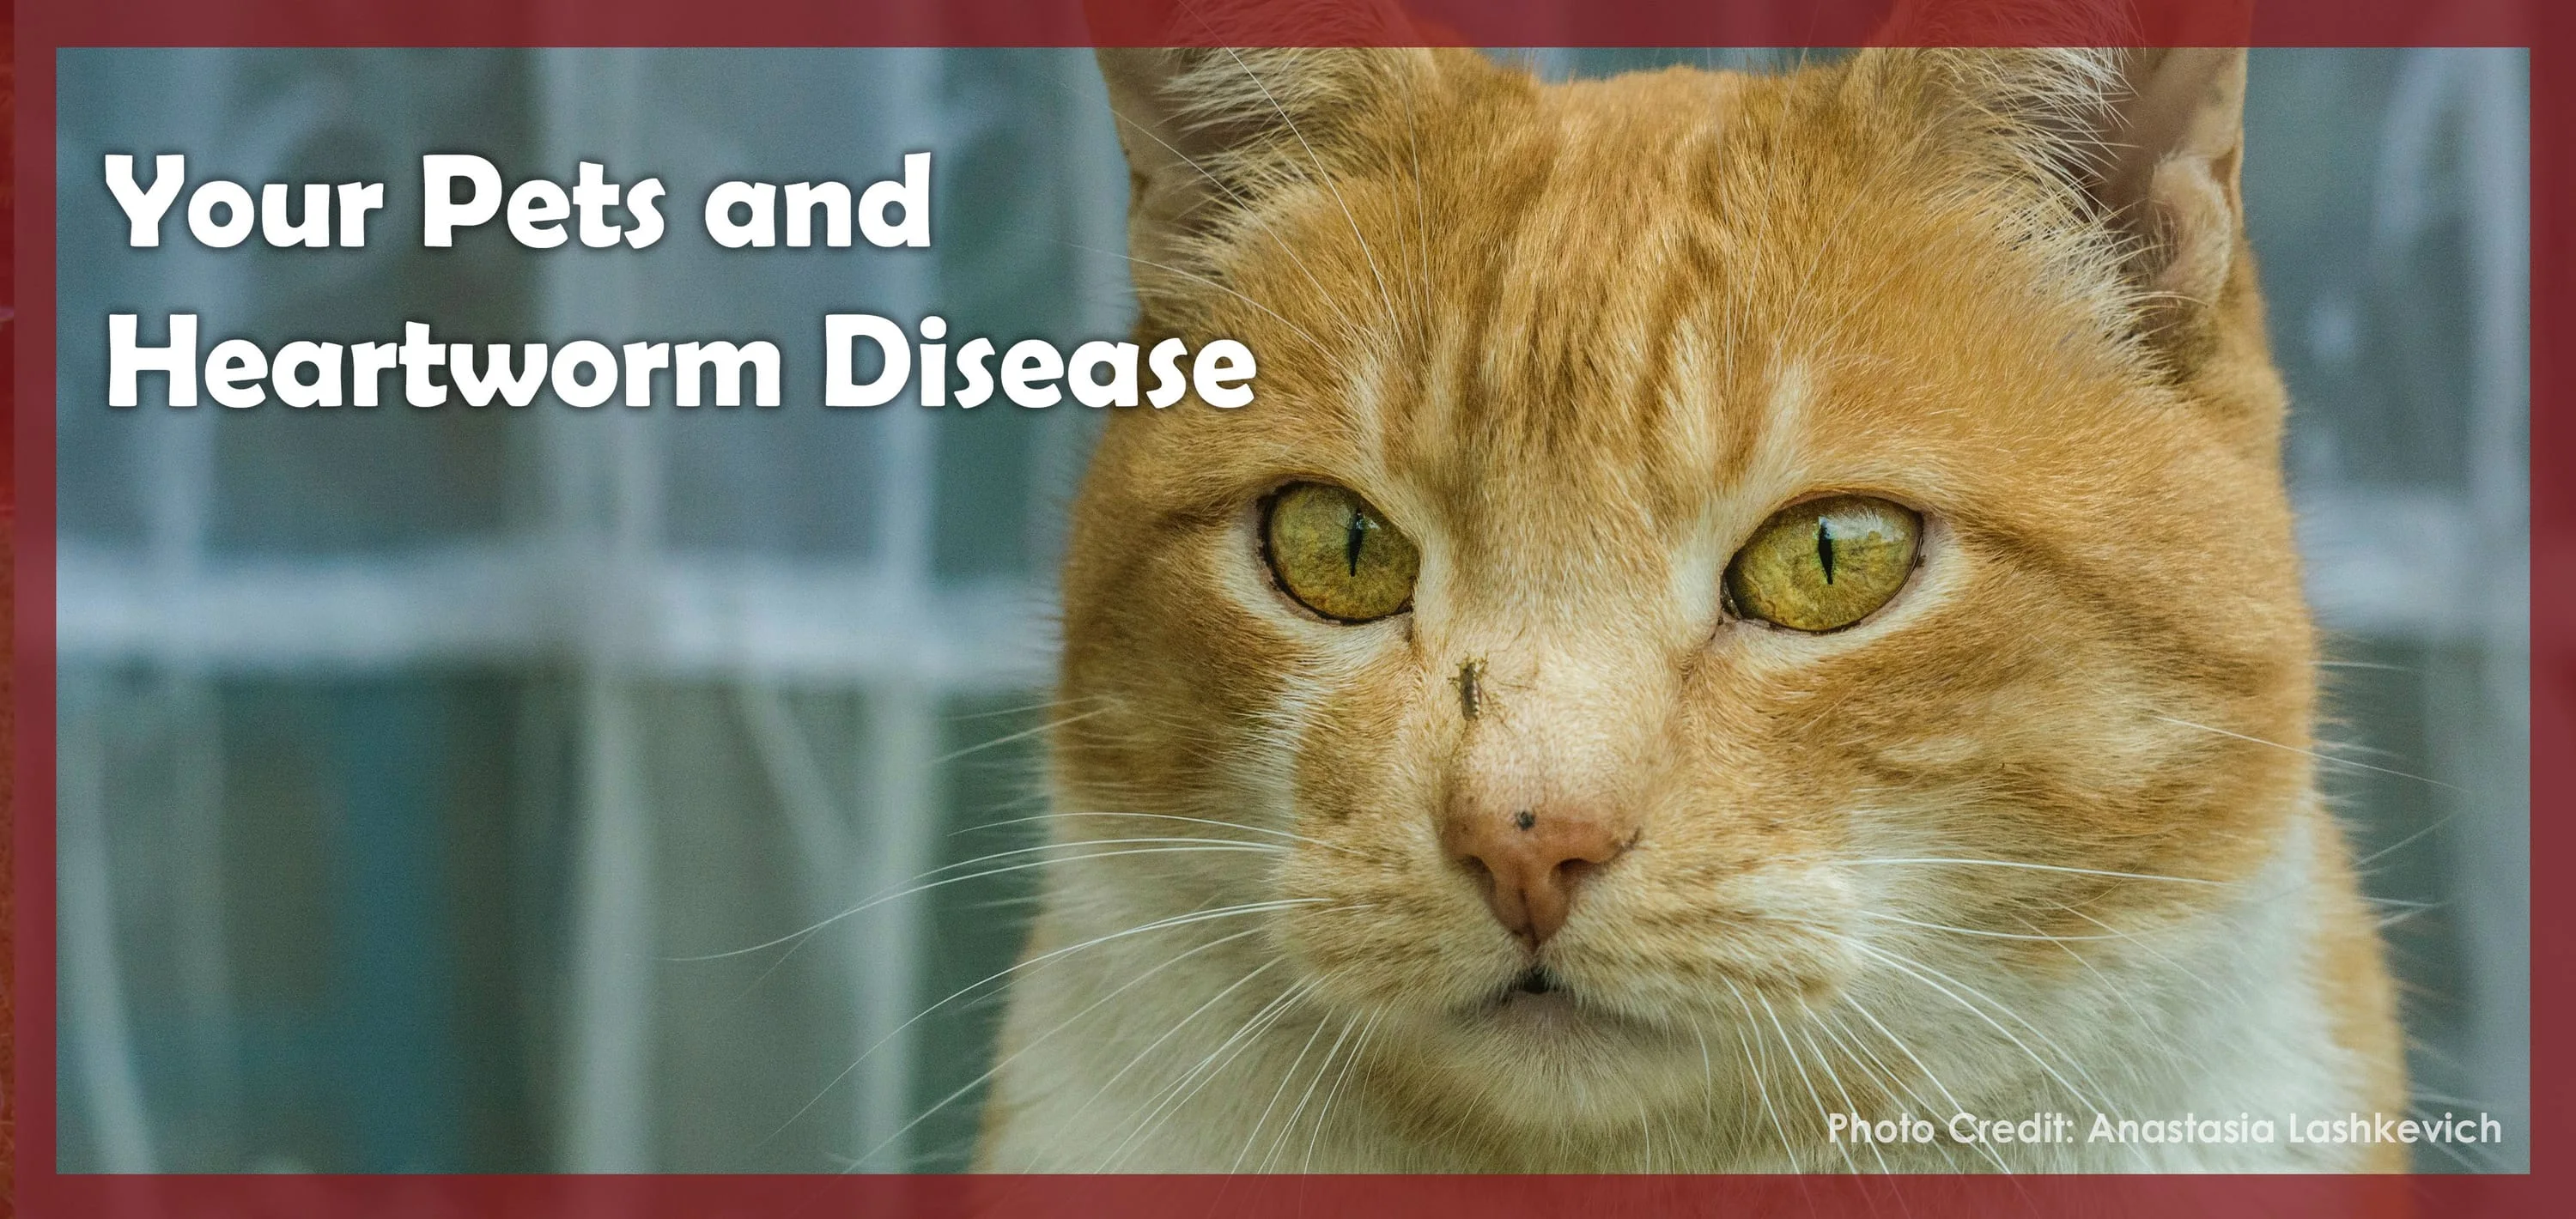 Your Pets and Heartworm Disease.  Photo of cat with mosquito on its nose.